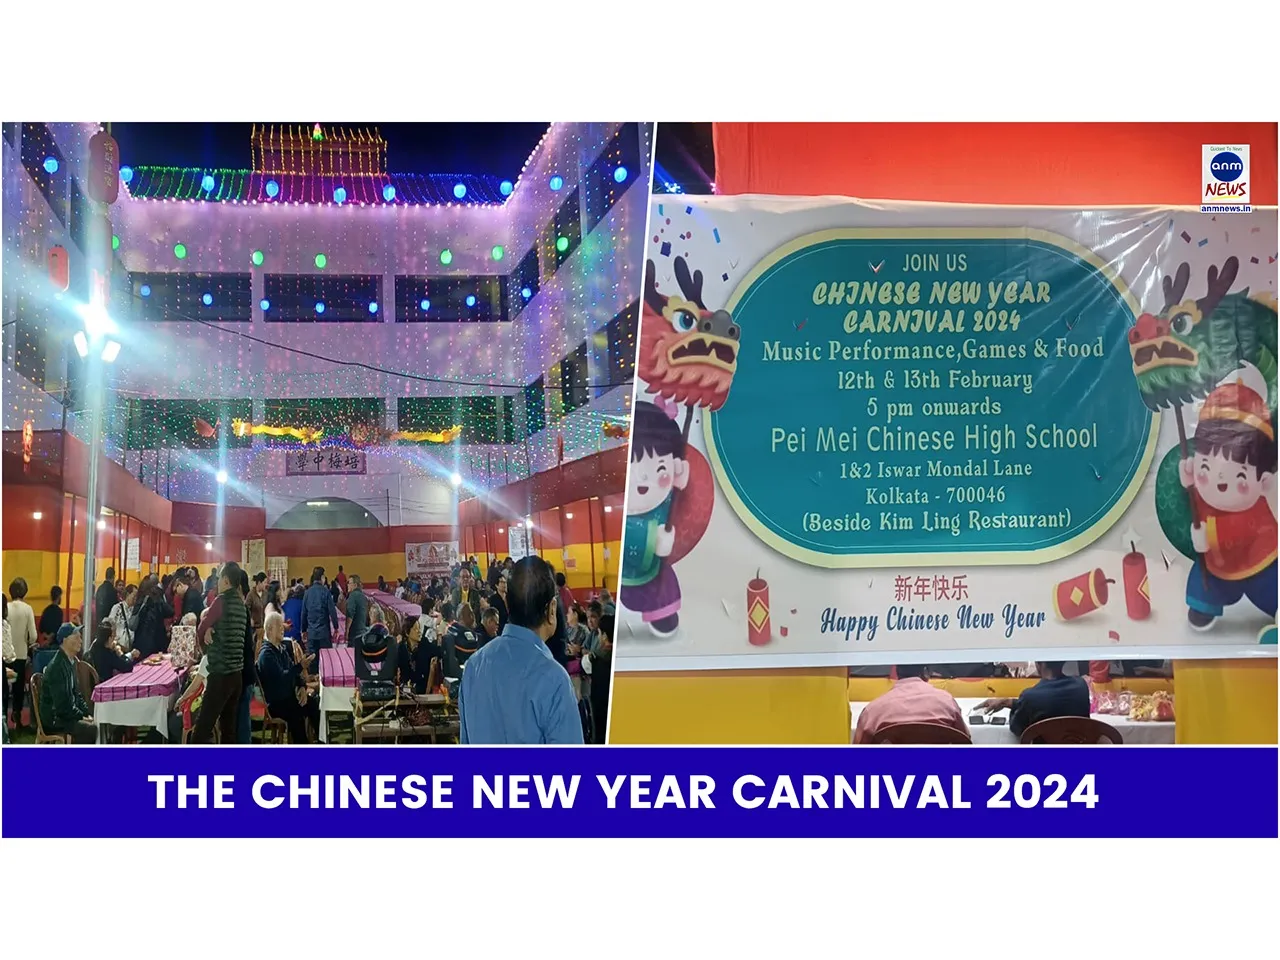 The Chinese New Year Carnival 2024